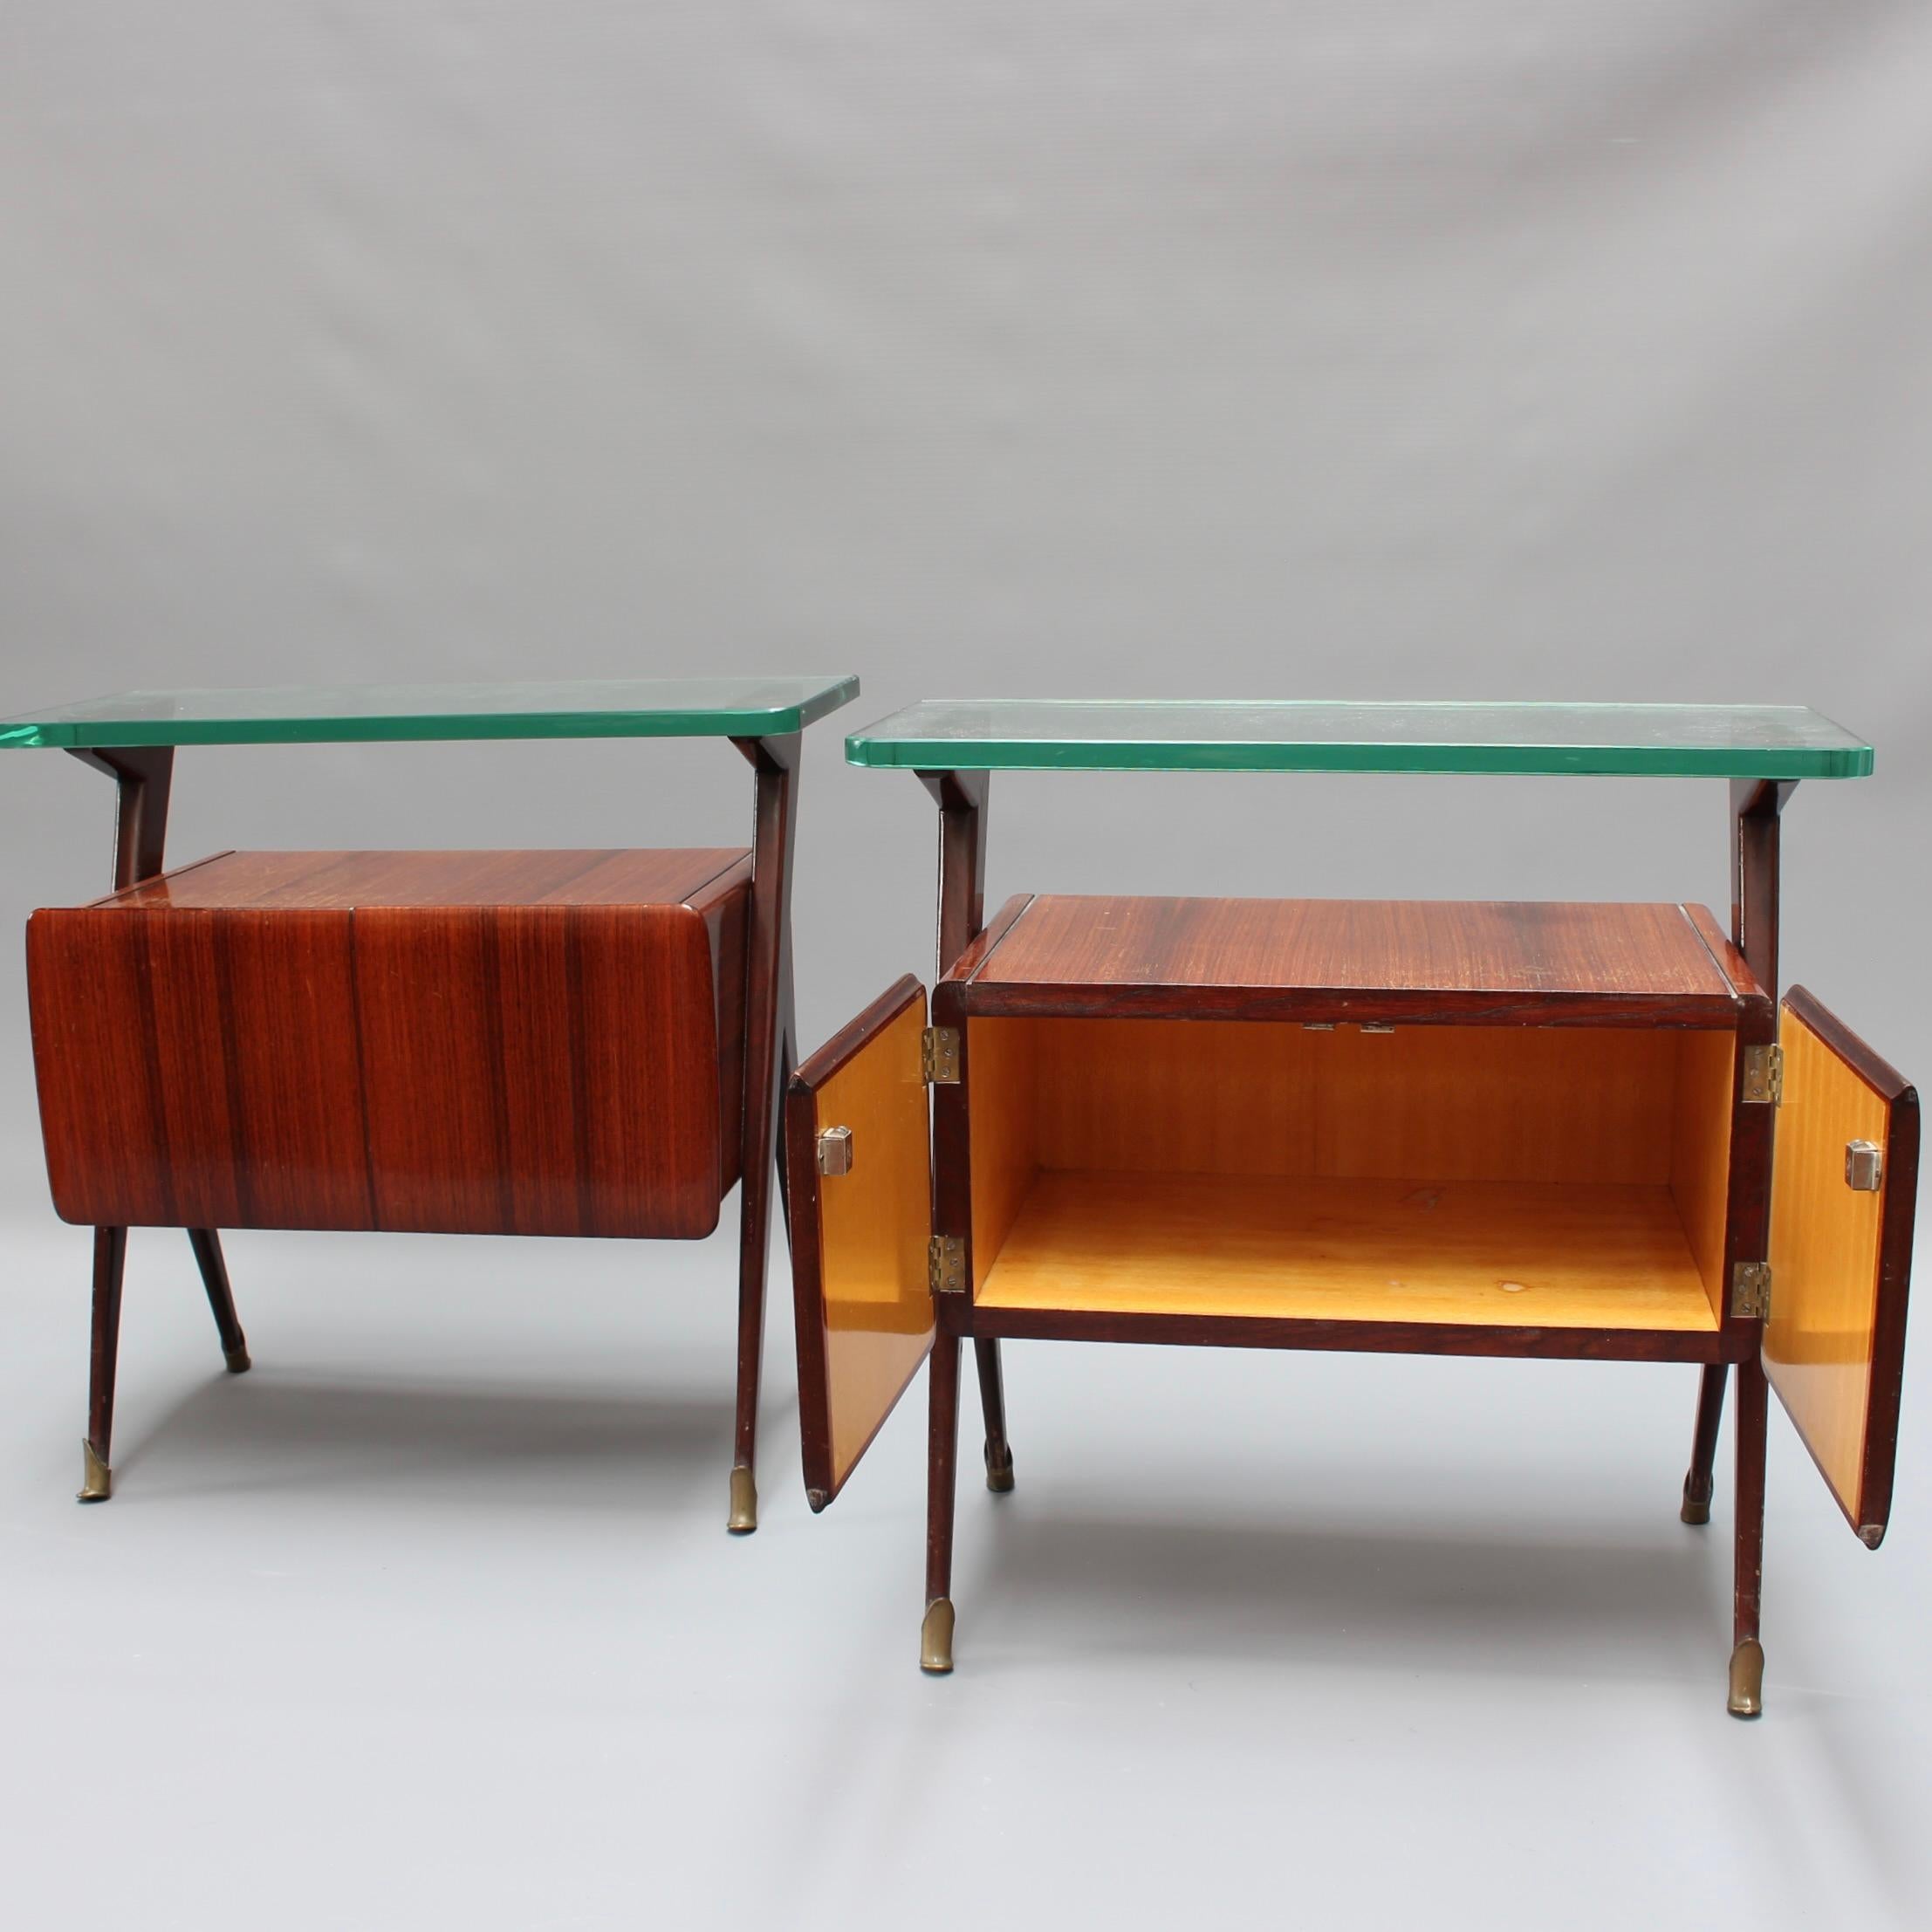 Pair of Vintage Italian Bedside Tables Attributed to Silvio Cavatorta  For Sale 3